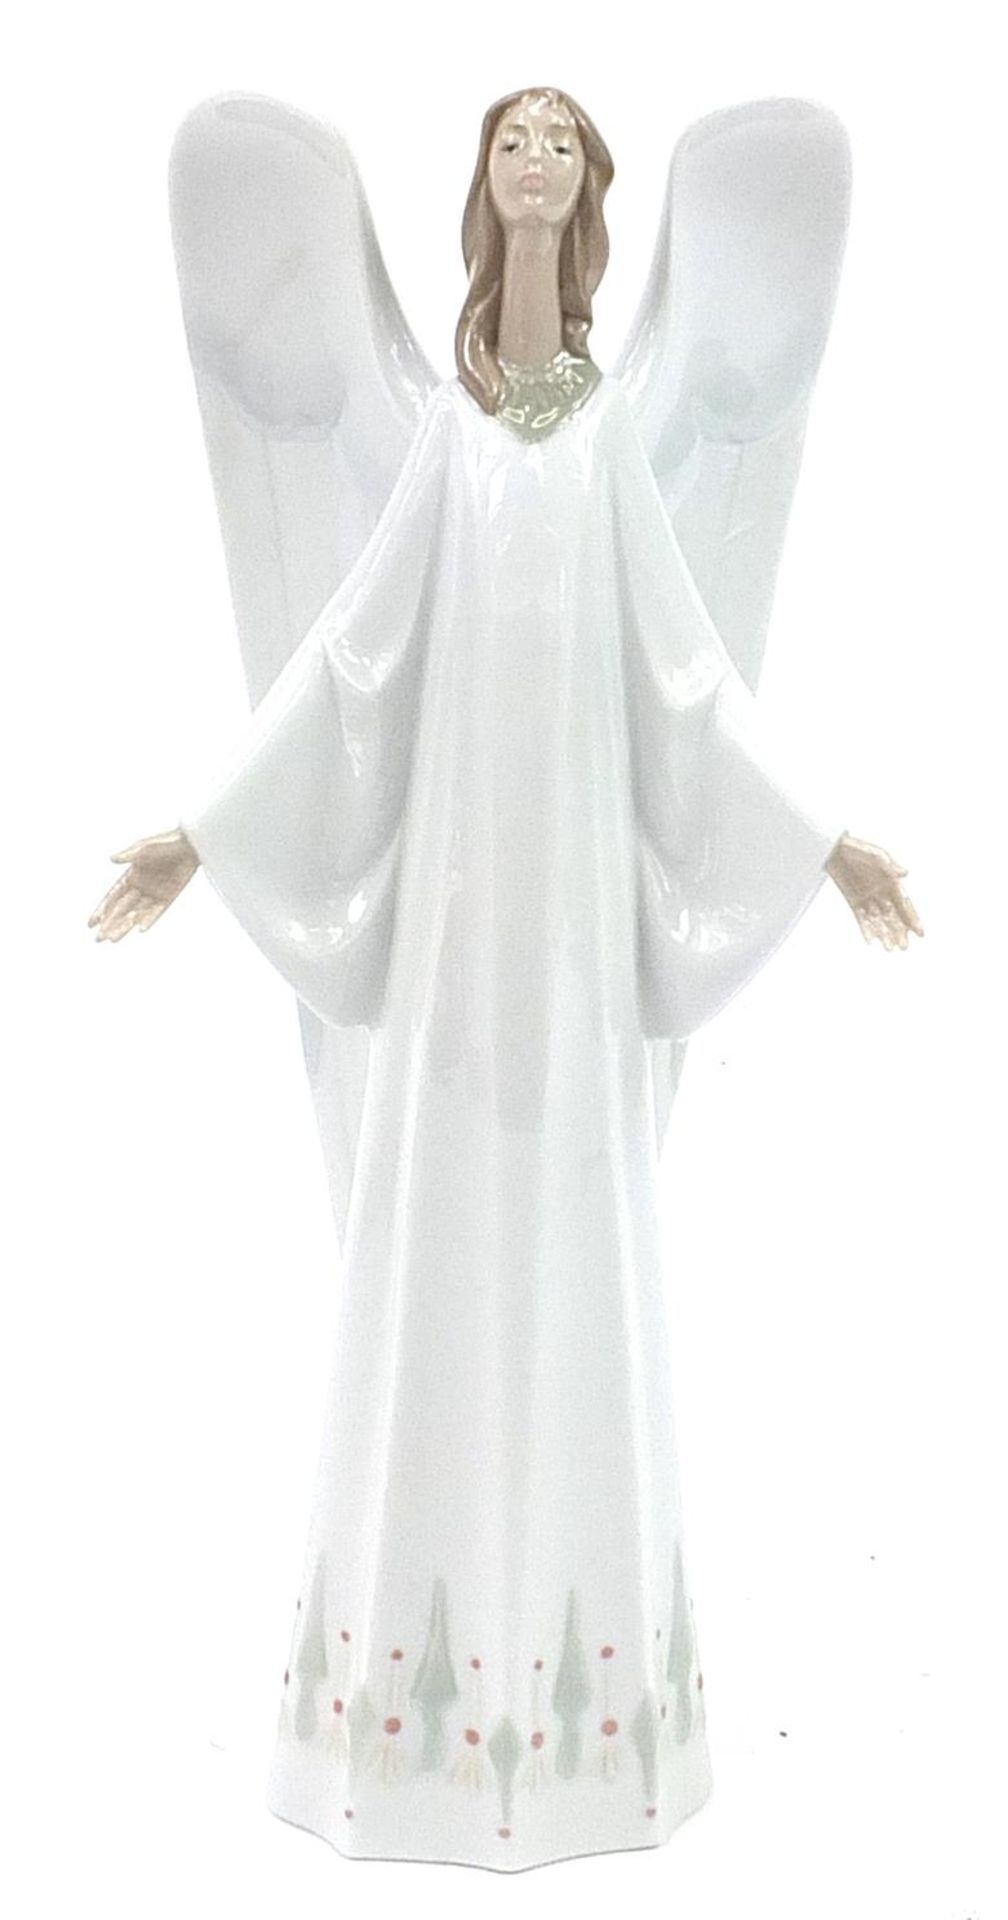 Nao figurine of an angel numbered 1273, with box, 31cm high - Image 2 of 5